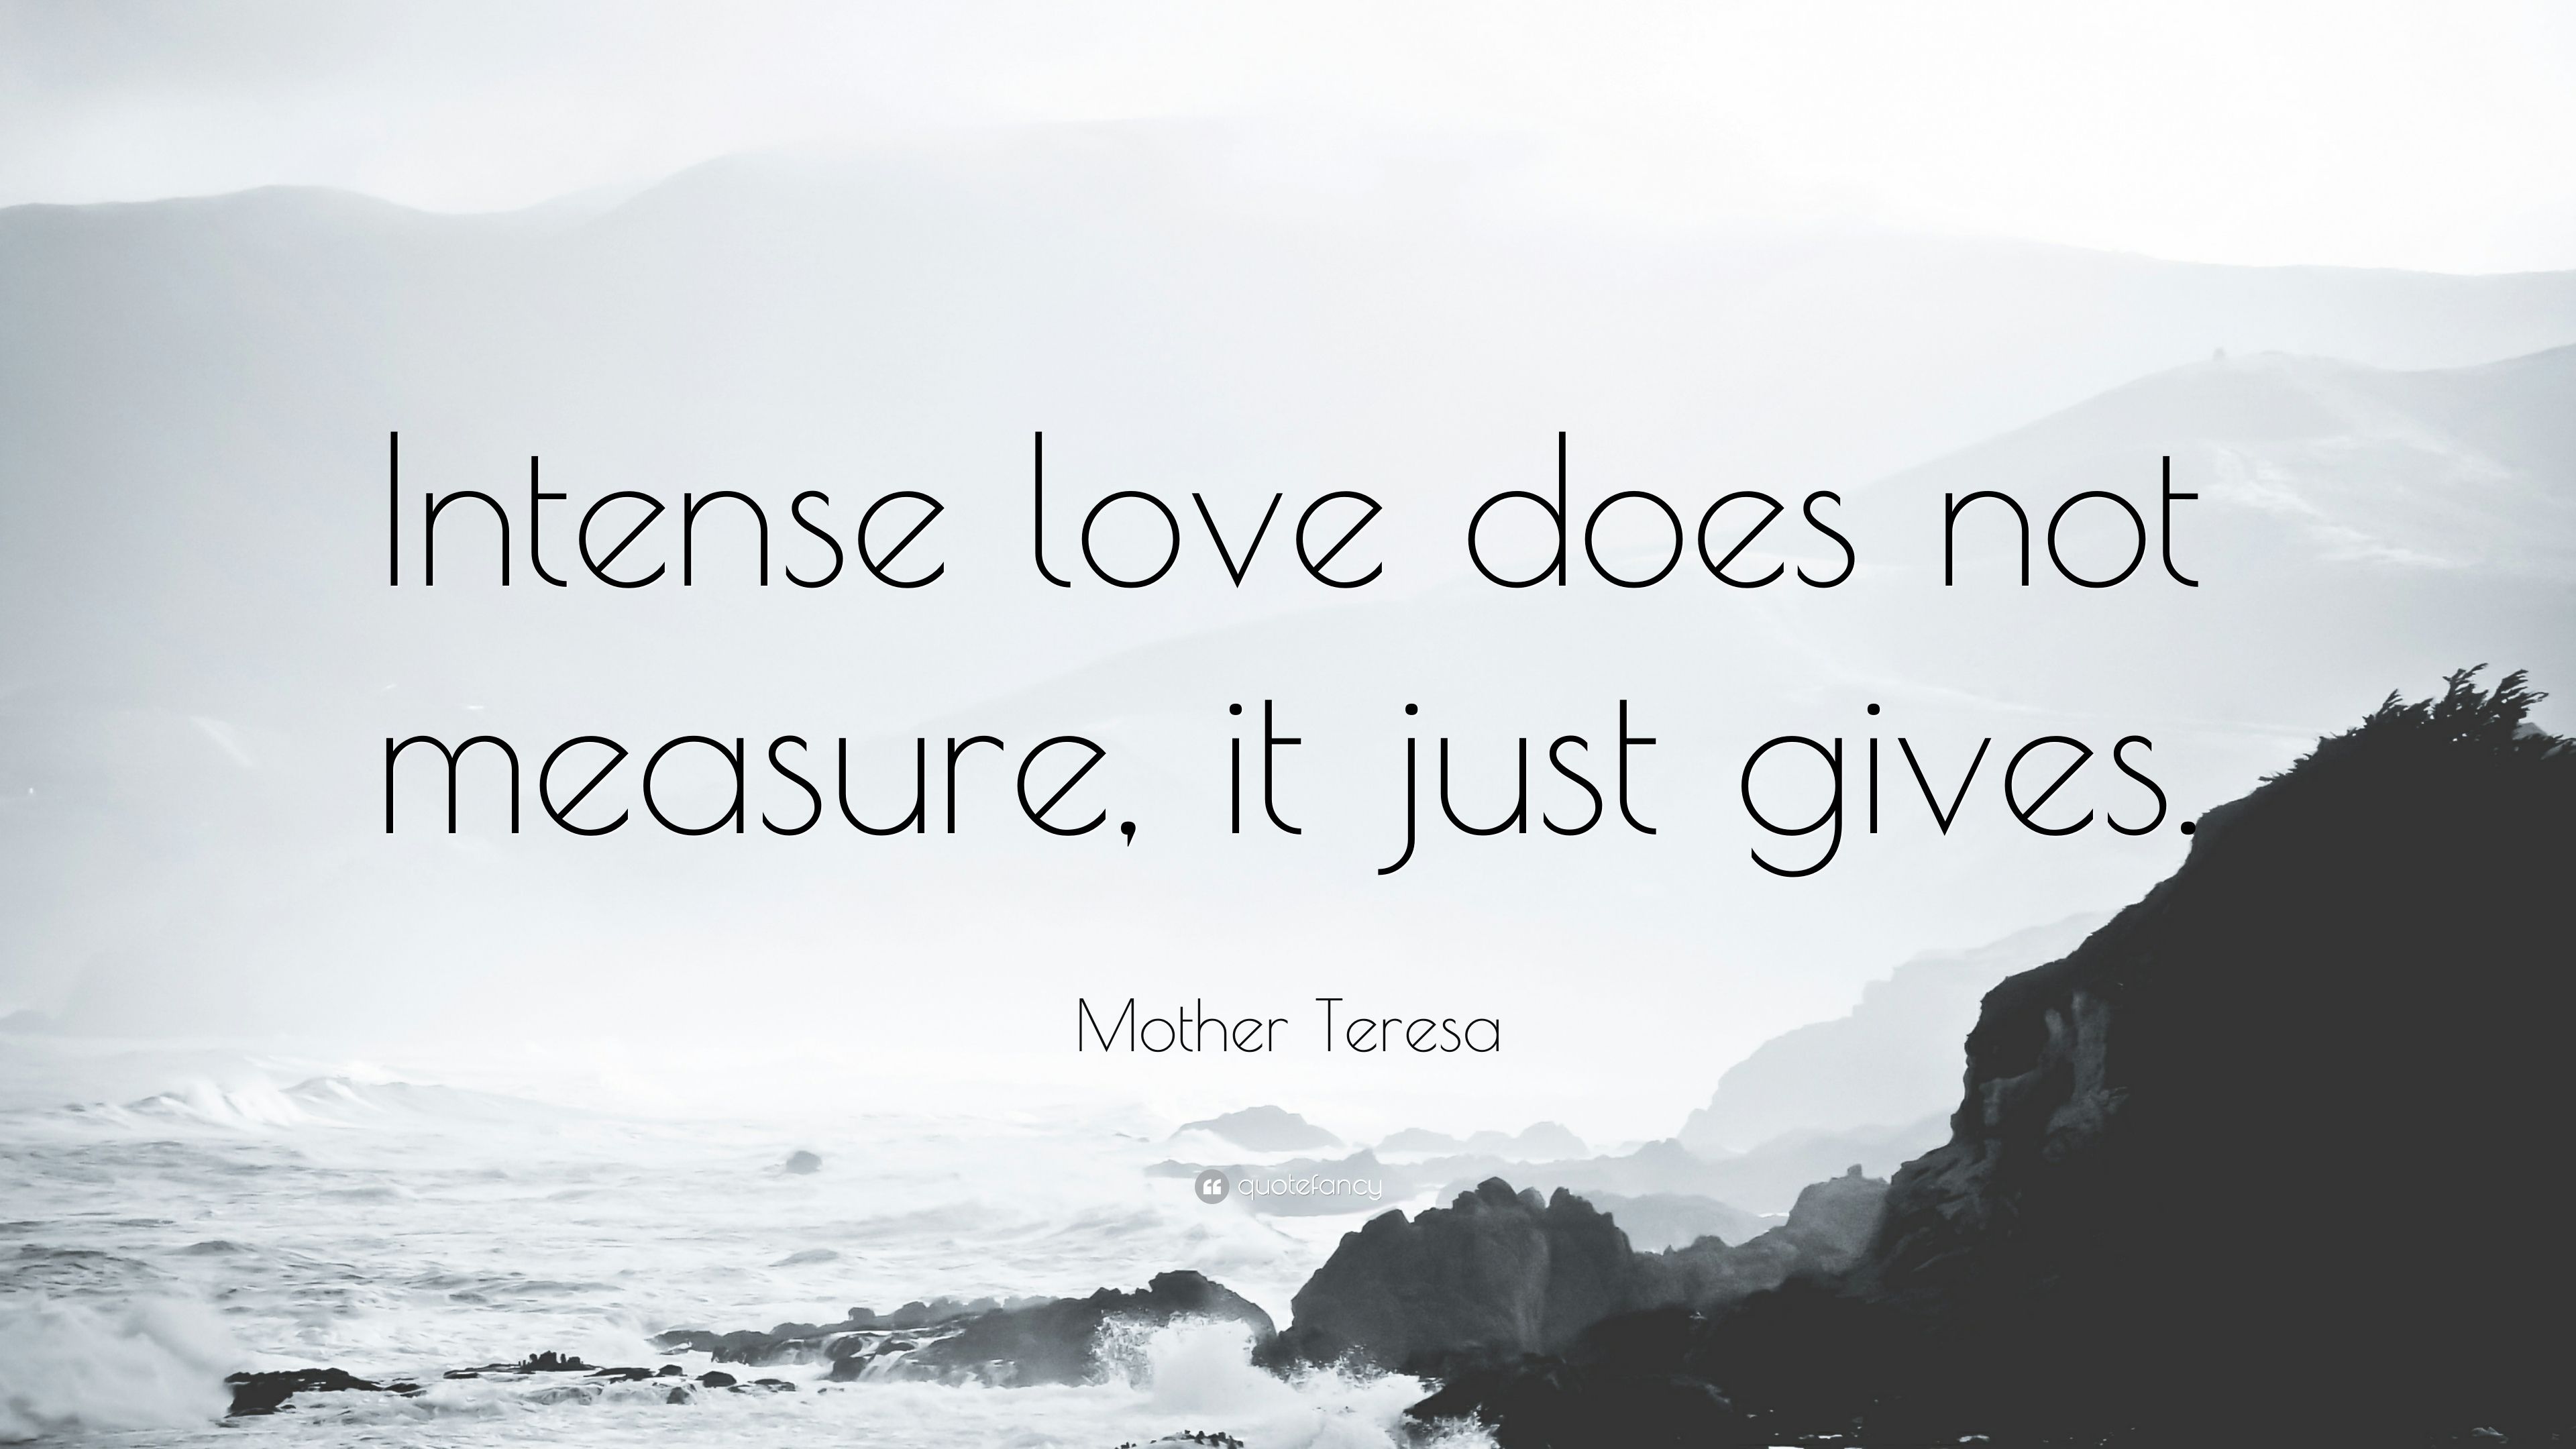 Mother Teresa Quote: “Intense love does not measure, it just gives